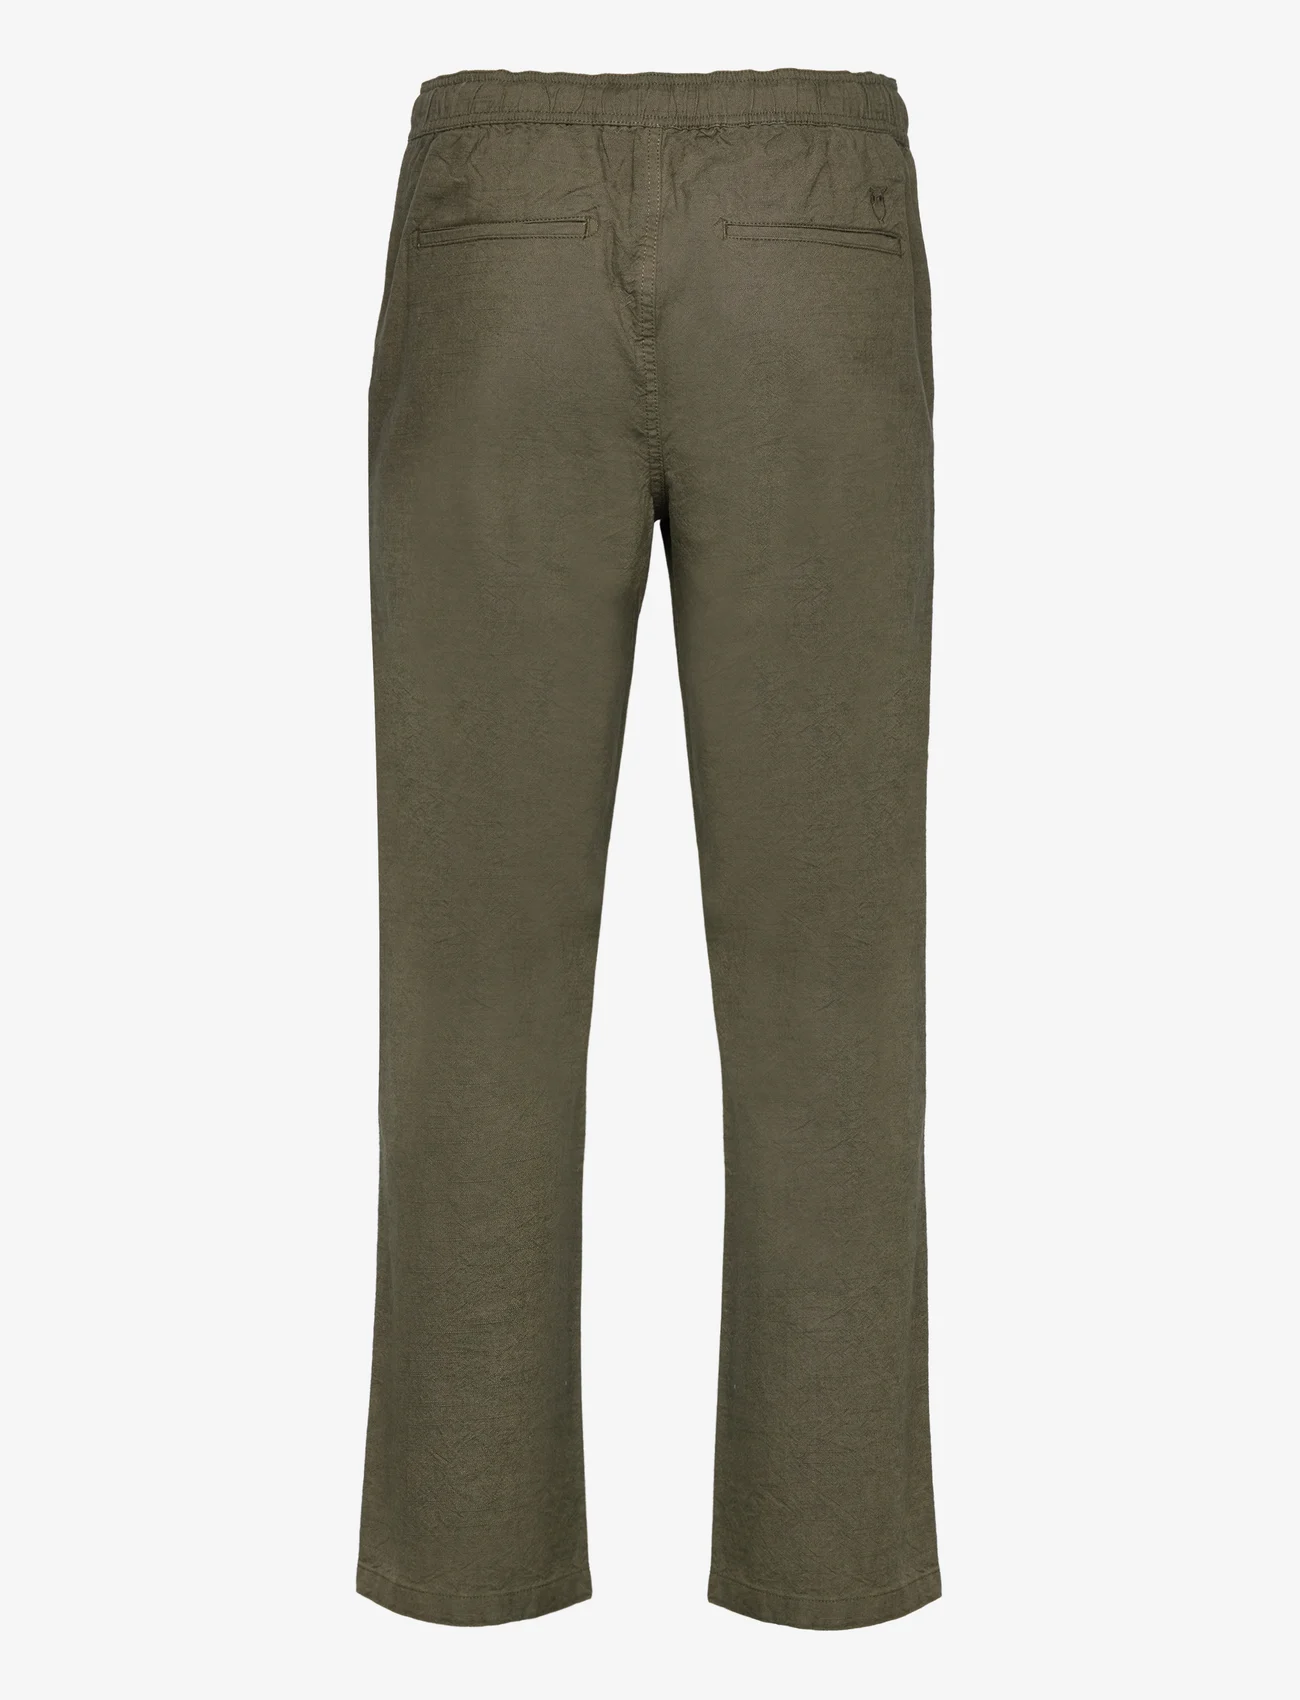 Knowledge Cotton Apparel - FIG loose linen look pants - GOTS/V - casual - burned olive - 1